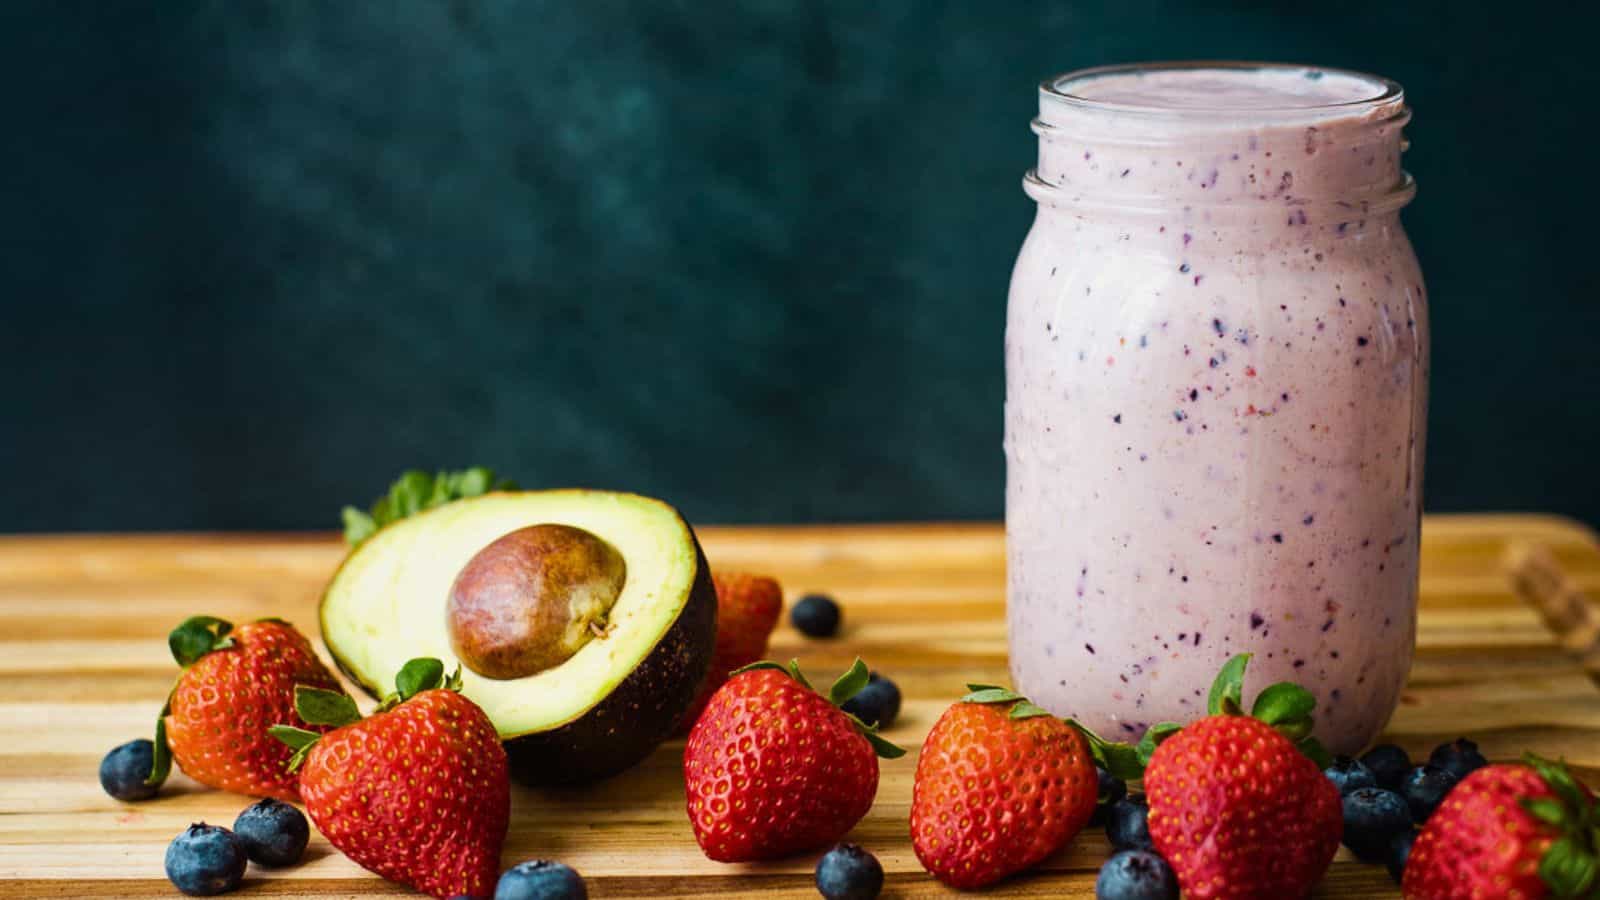 A berry avocado smoothie in a glass mason jar with strawberries, blueberries and avocado on the side.